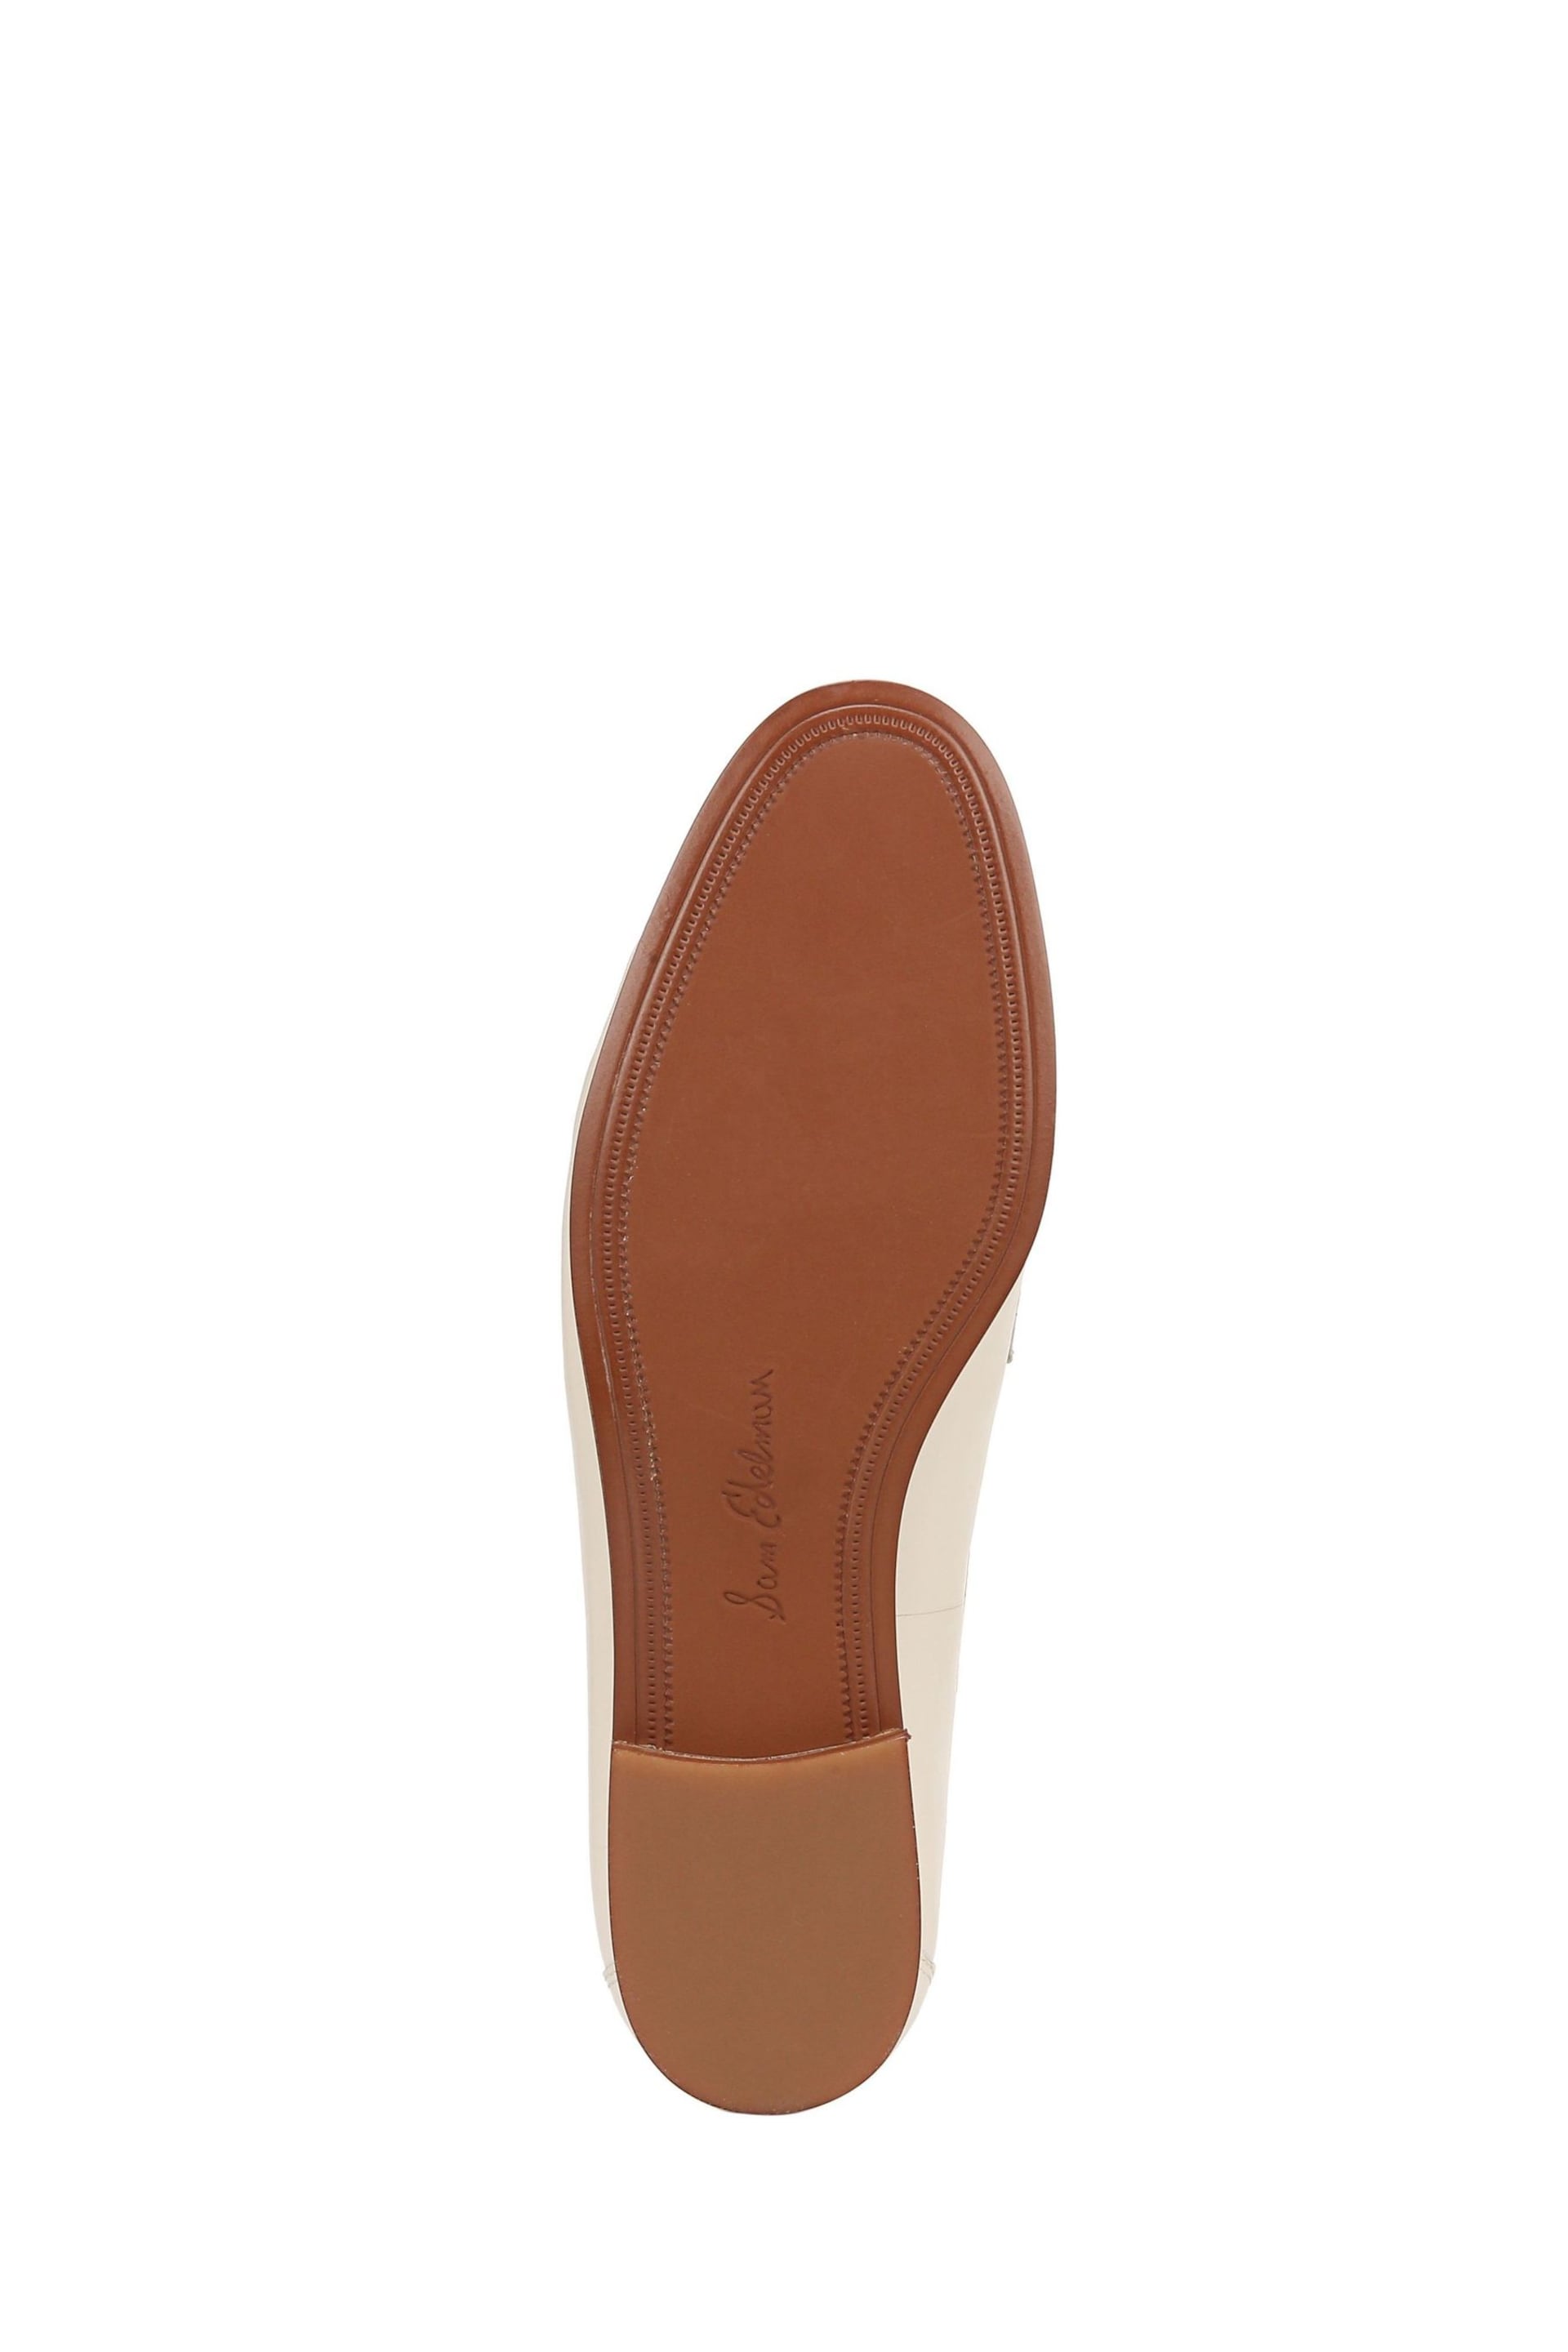 Sam Edelman Lucca Bit Loafers - Image 7 of 7